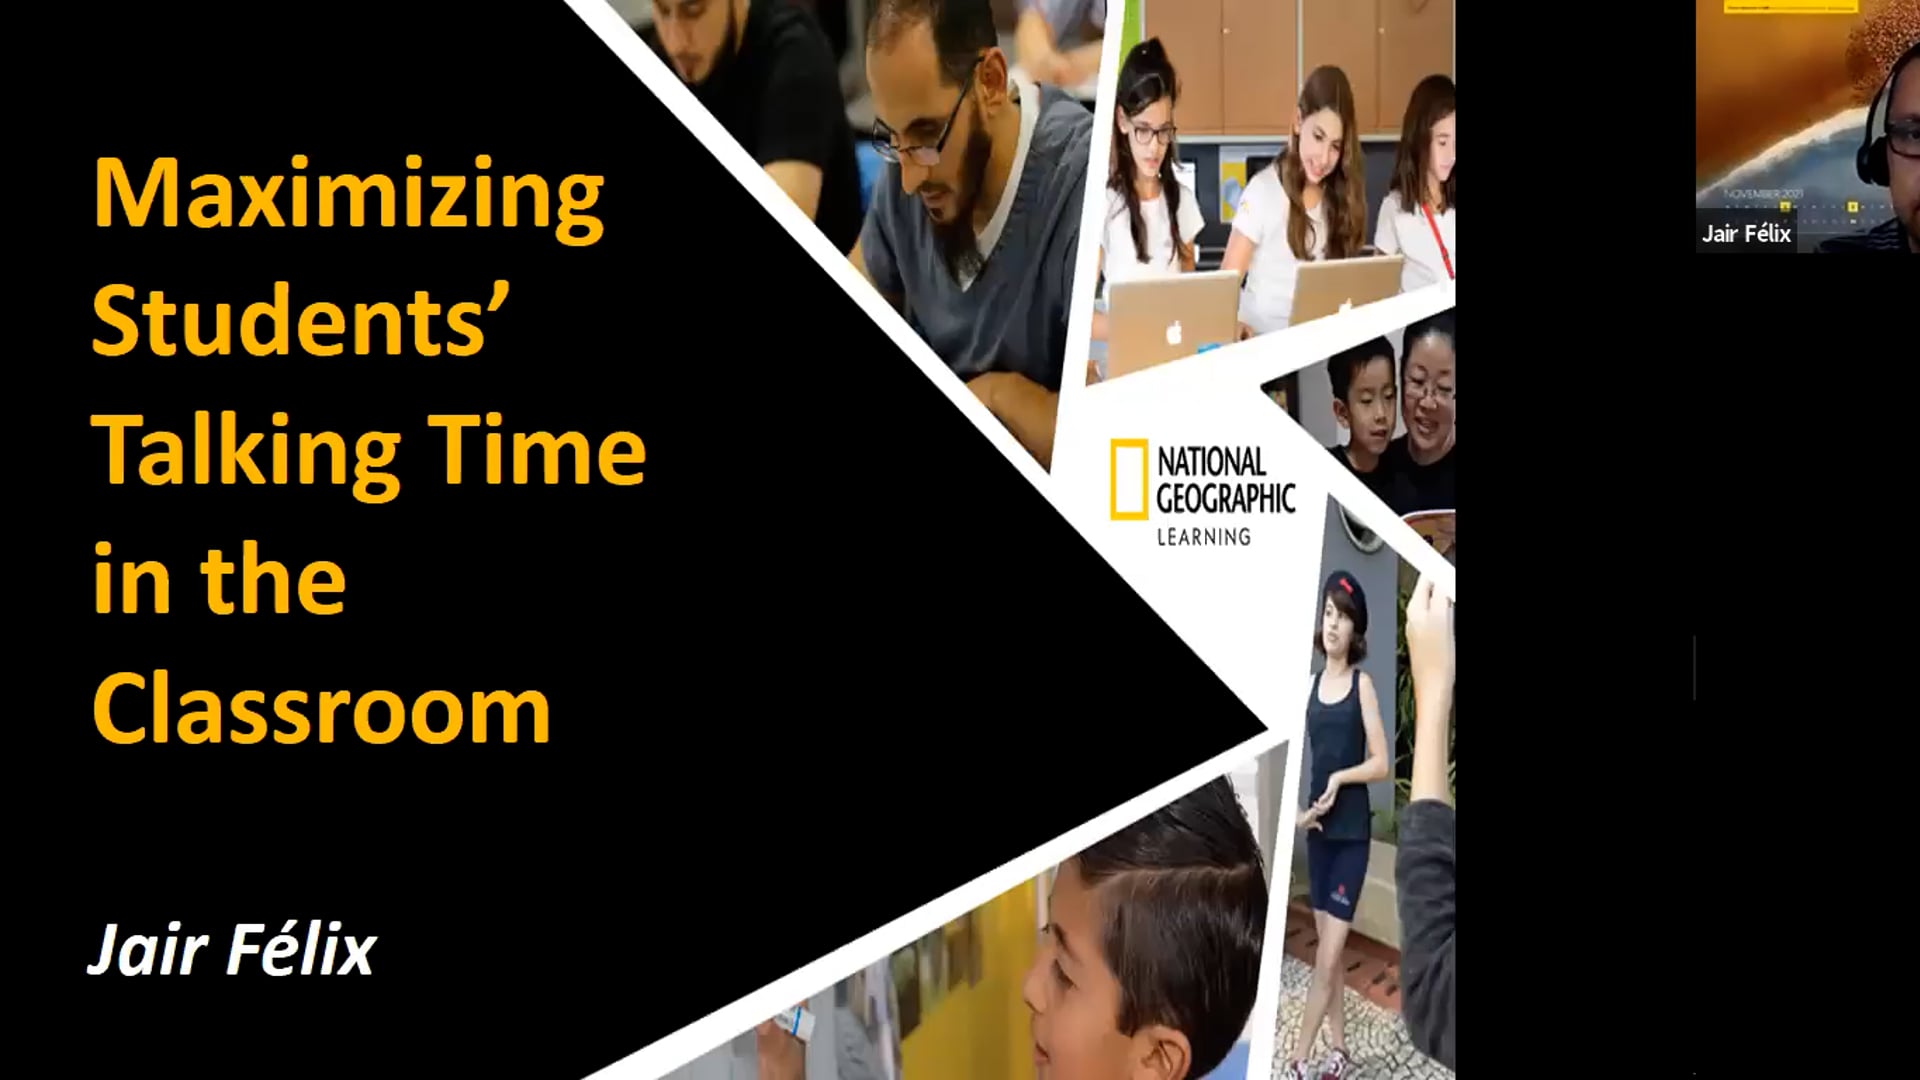 Maximizing Student’s Talking Time in the Classroom